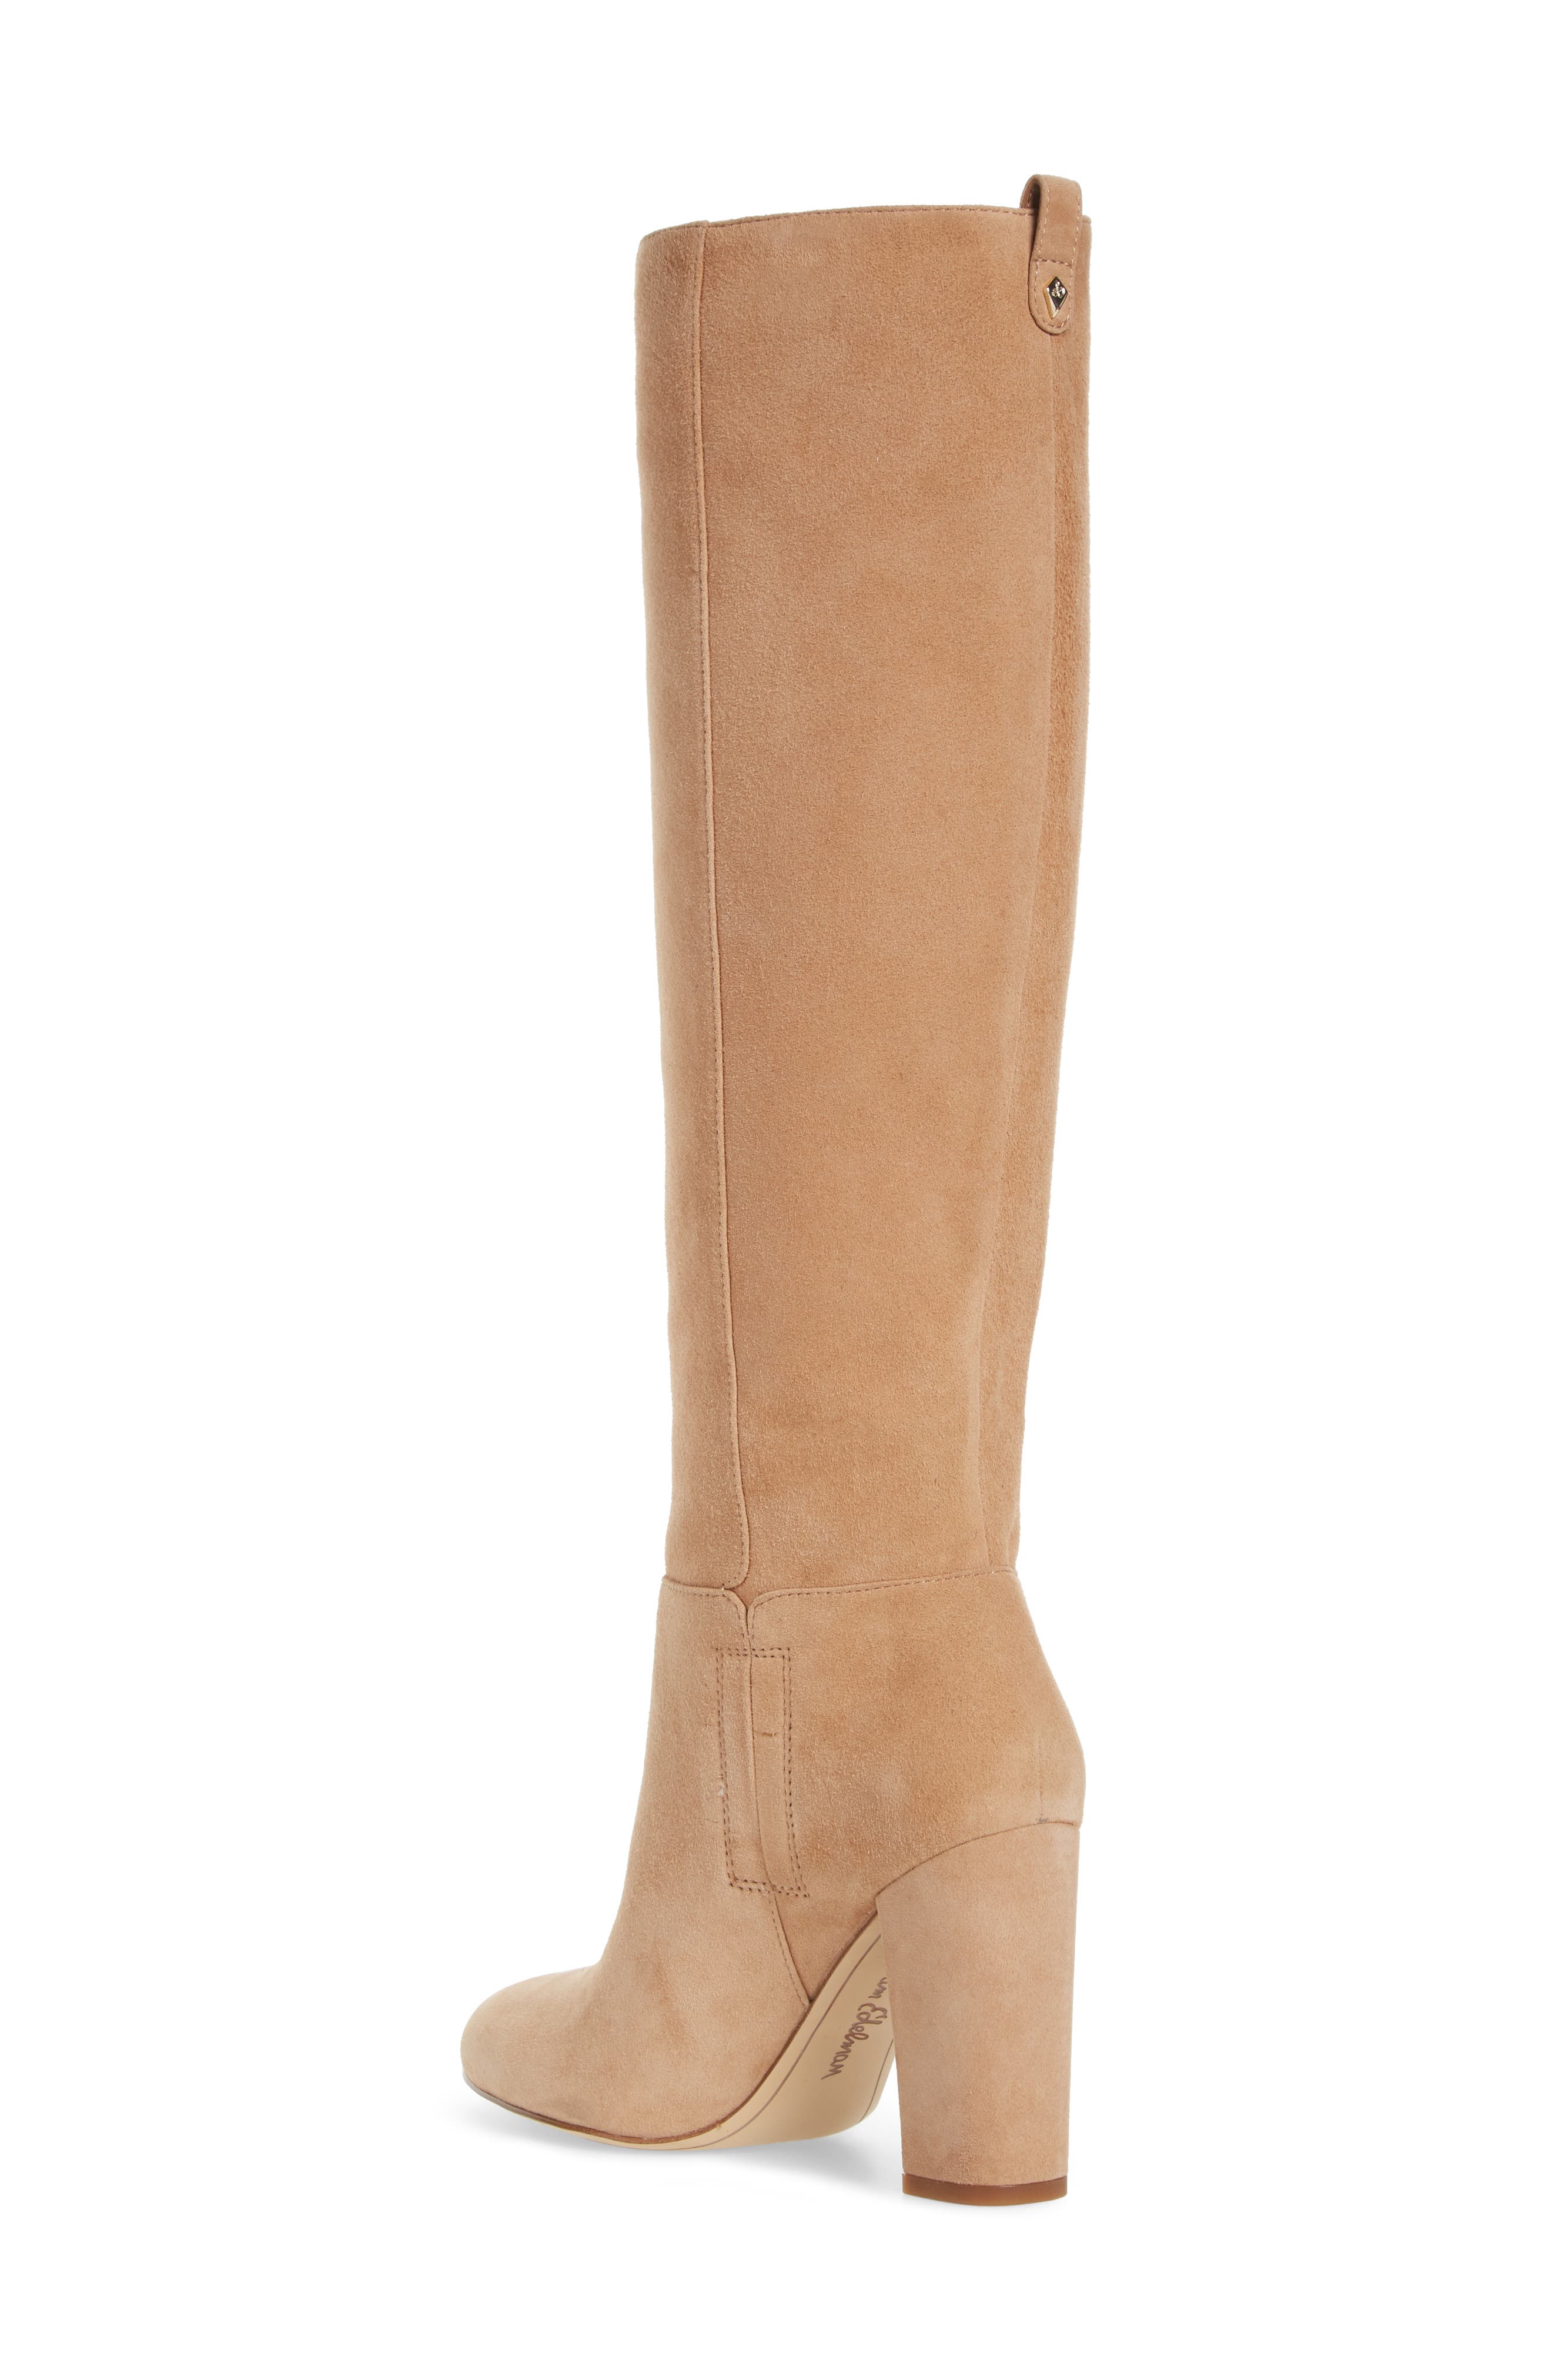 caprice suede boots